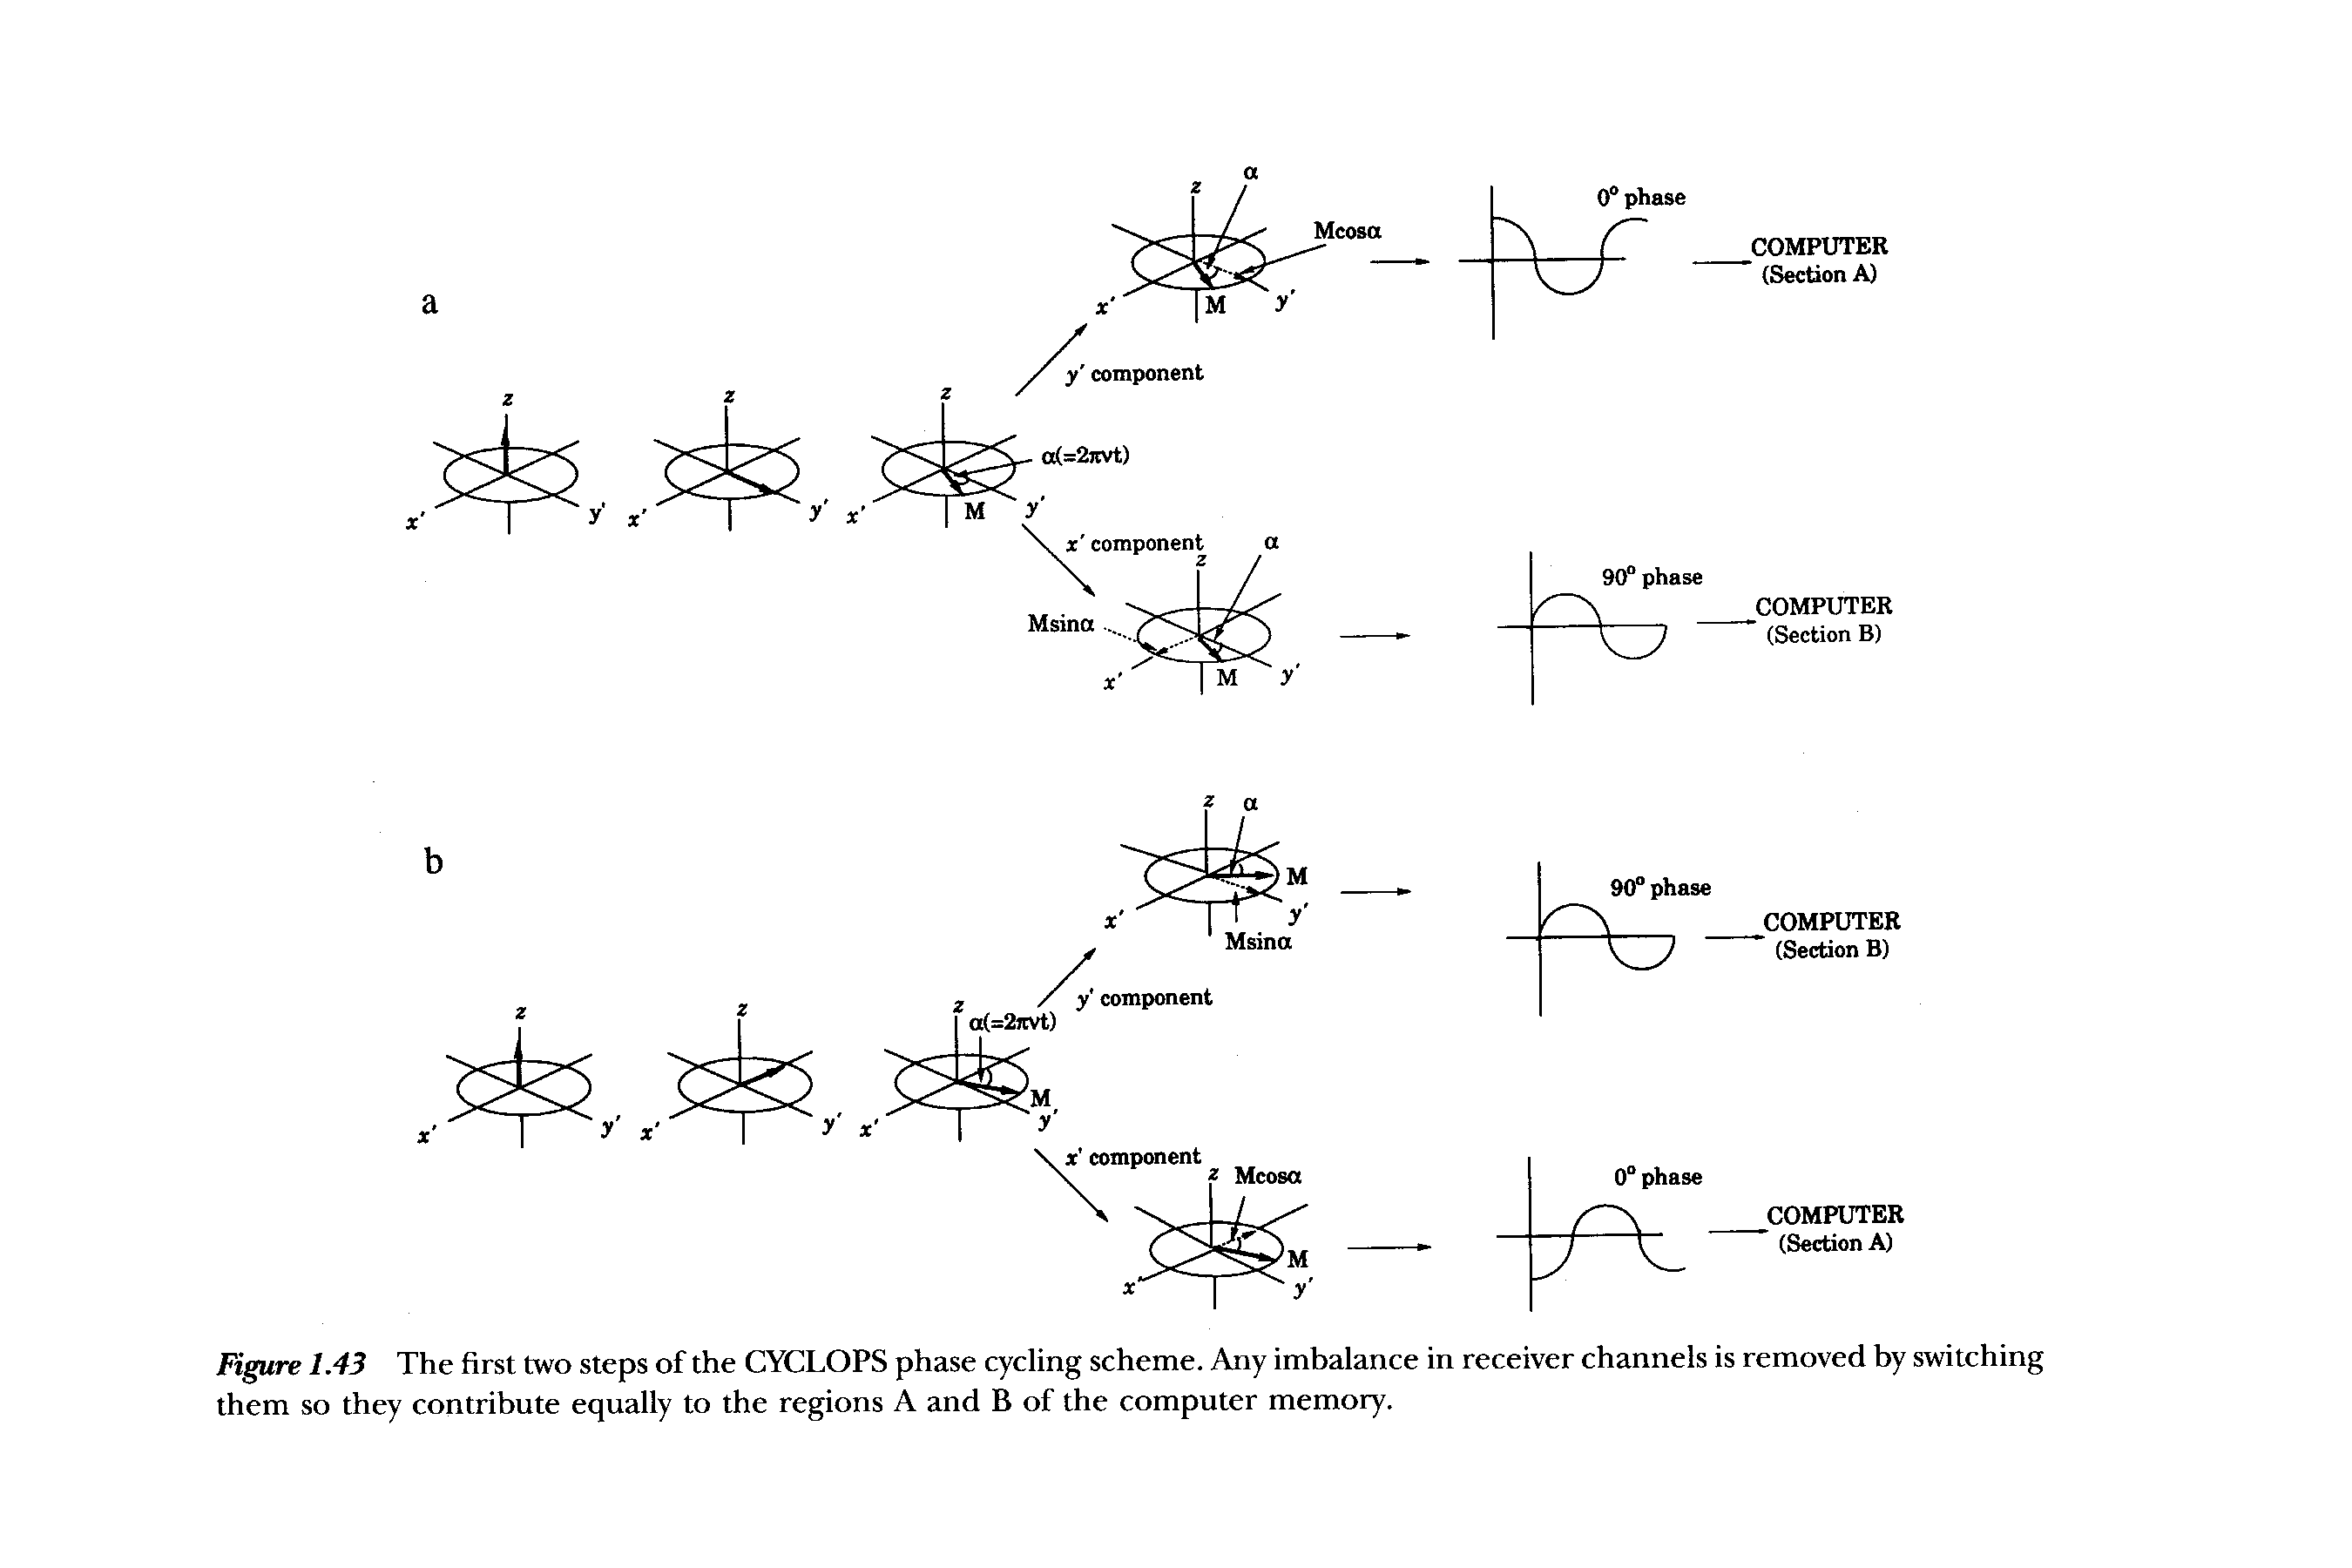 Figure 1.43 The first two steps of the CYCLOPS phase cycling scheme. Any imbalance in receiver channels is removed by switching them so they contribute equally to the regions A and B of the computer memory.